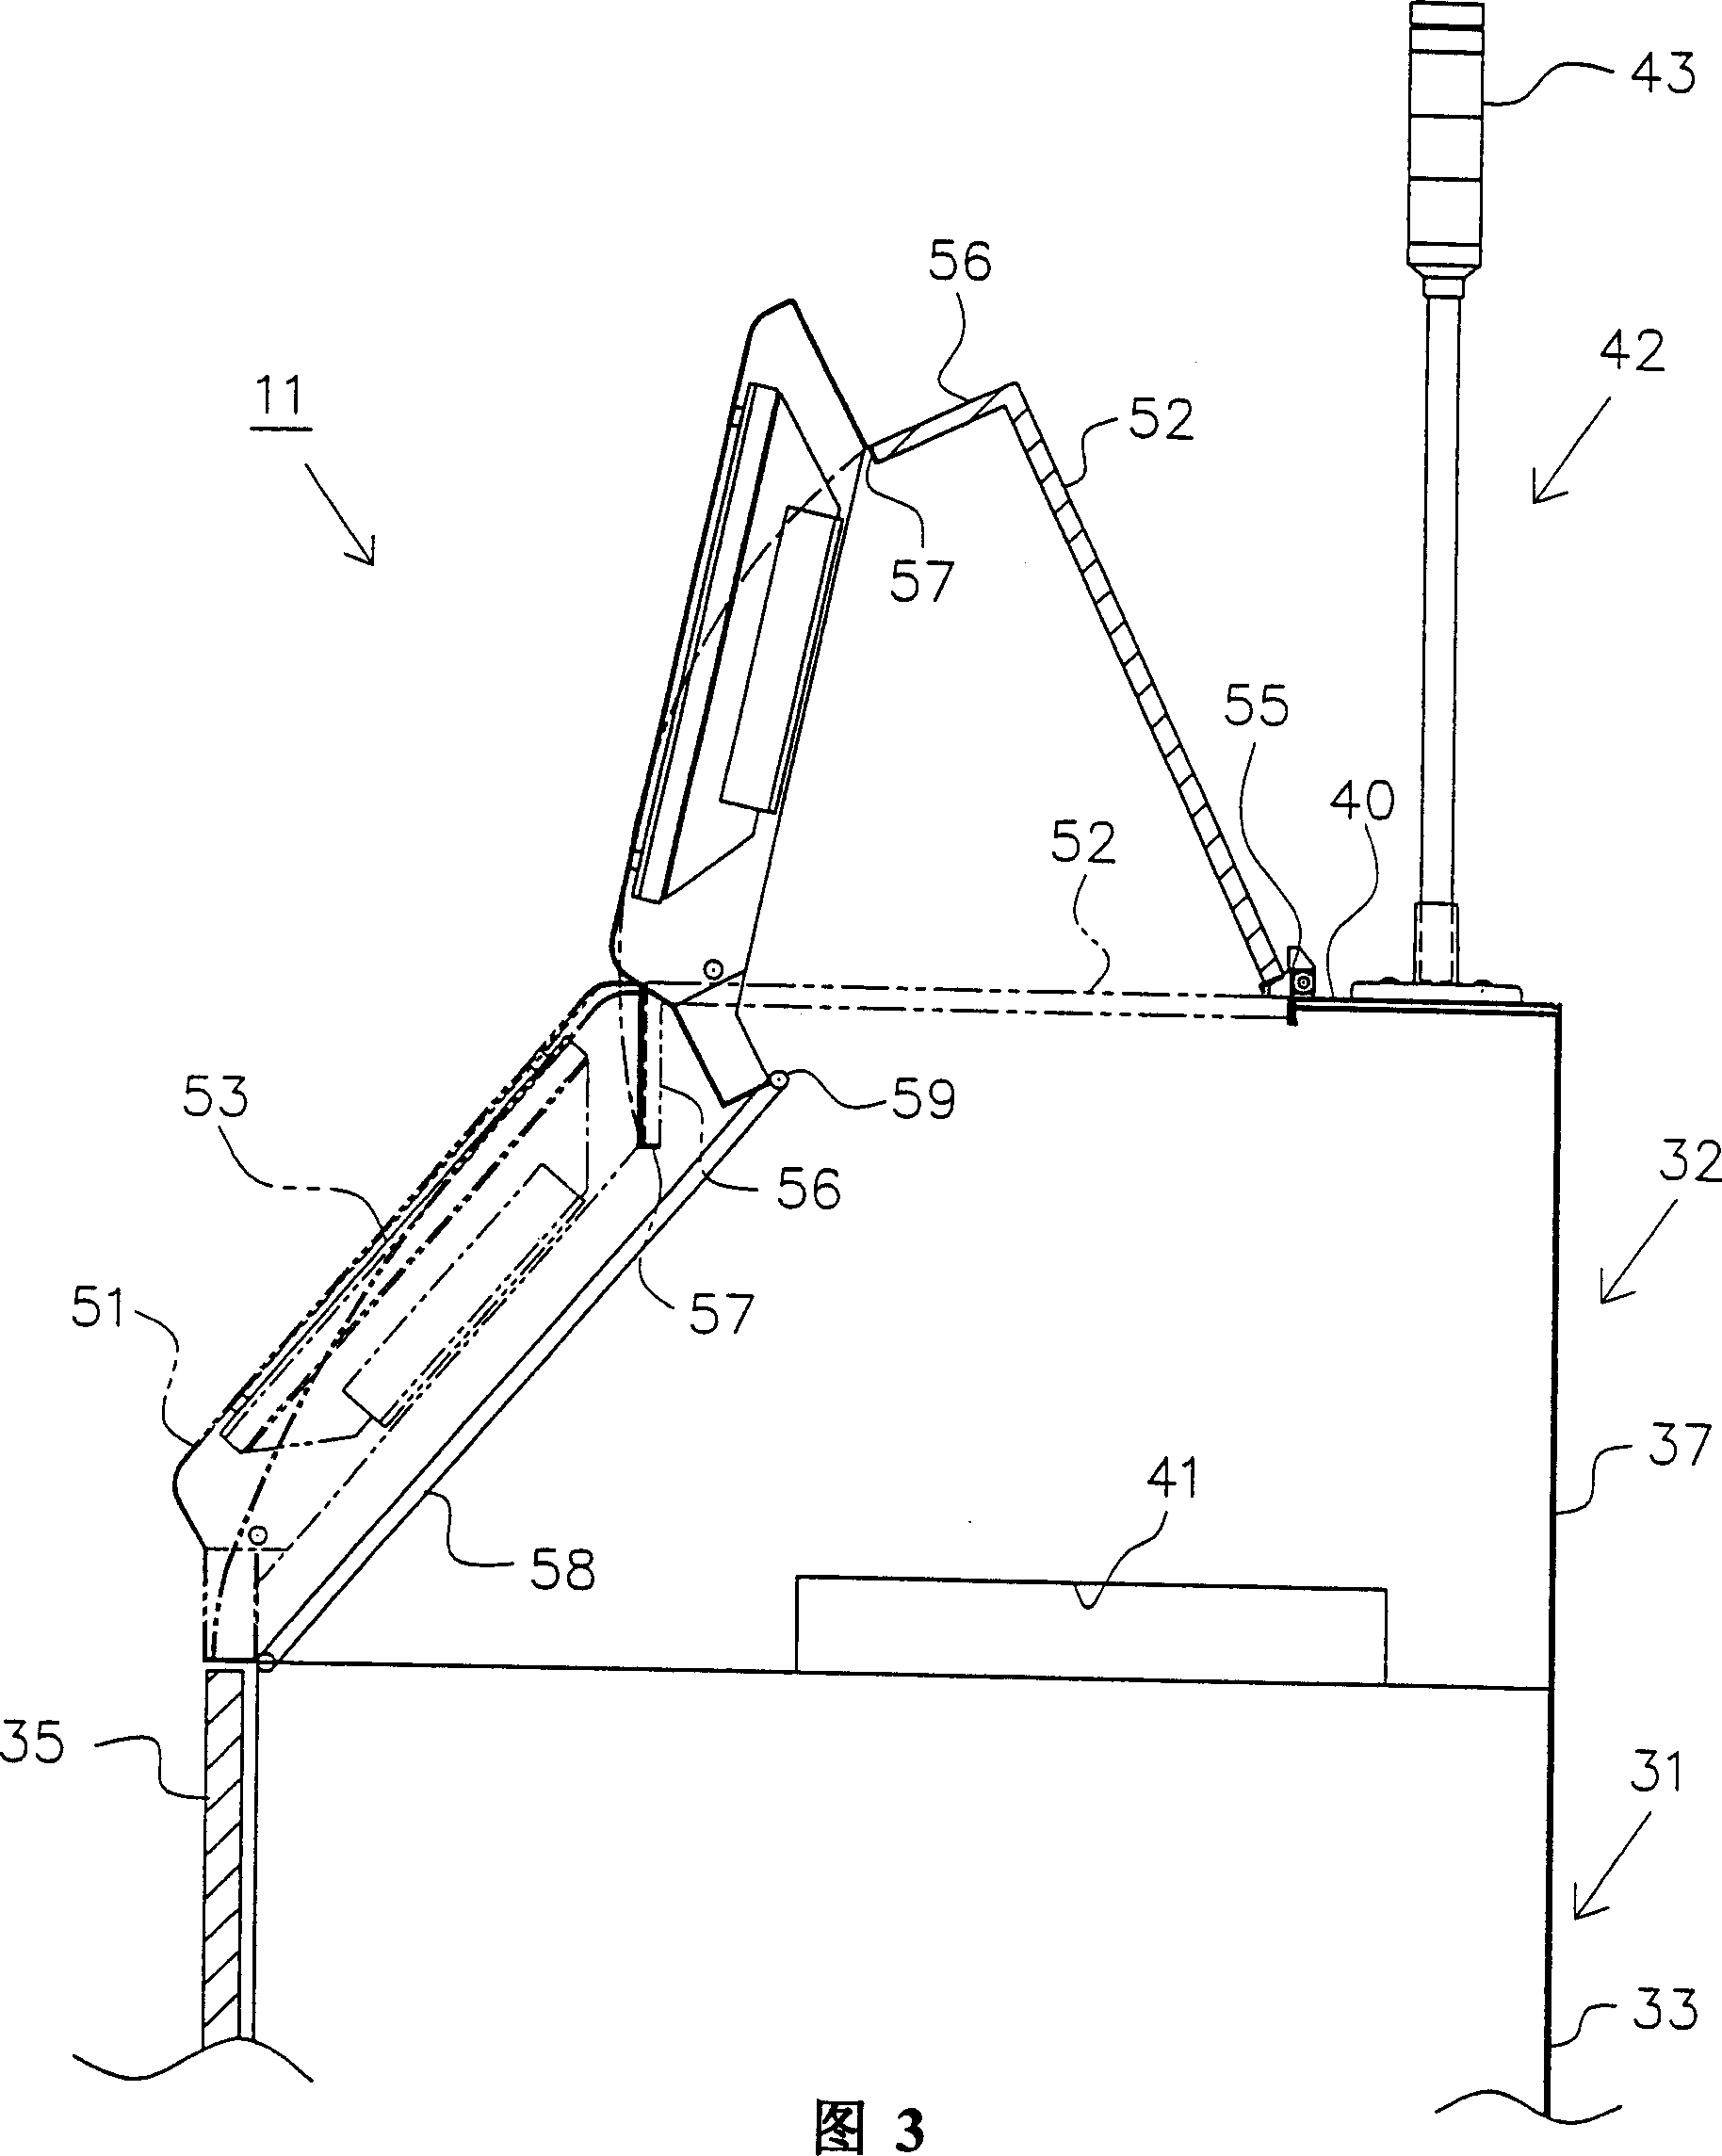 Printed circuit board fabrication-related device